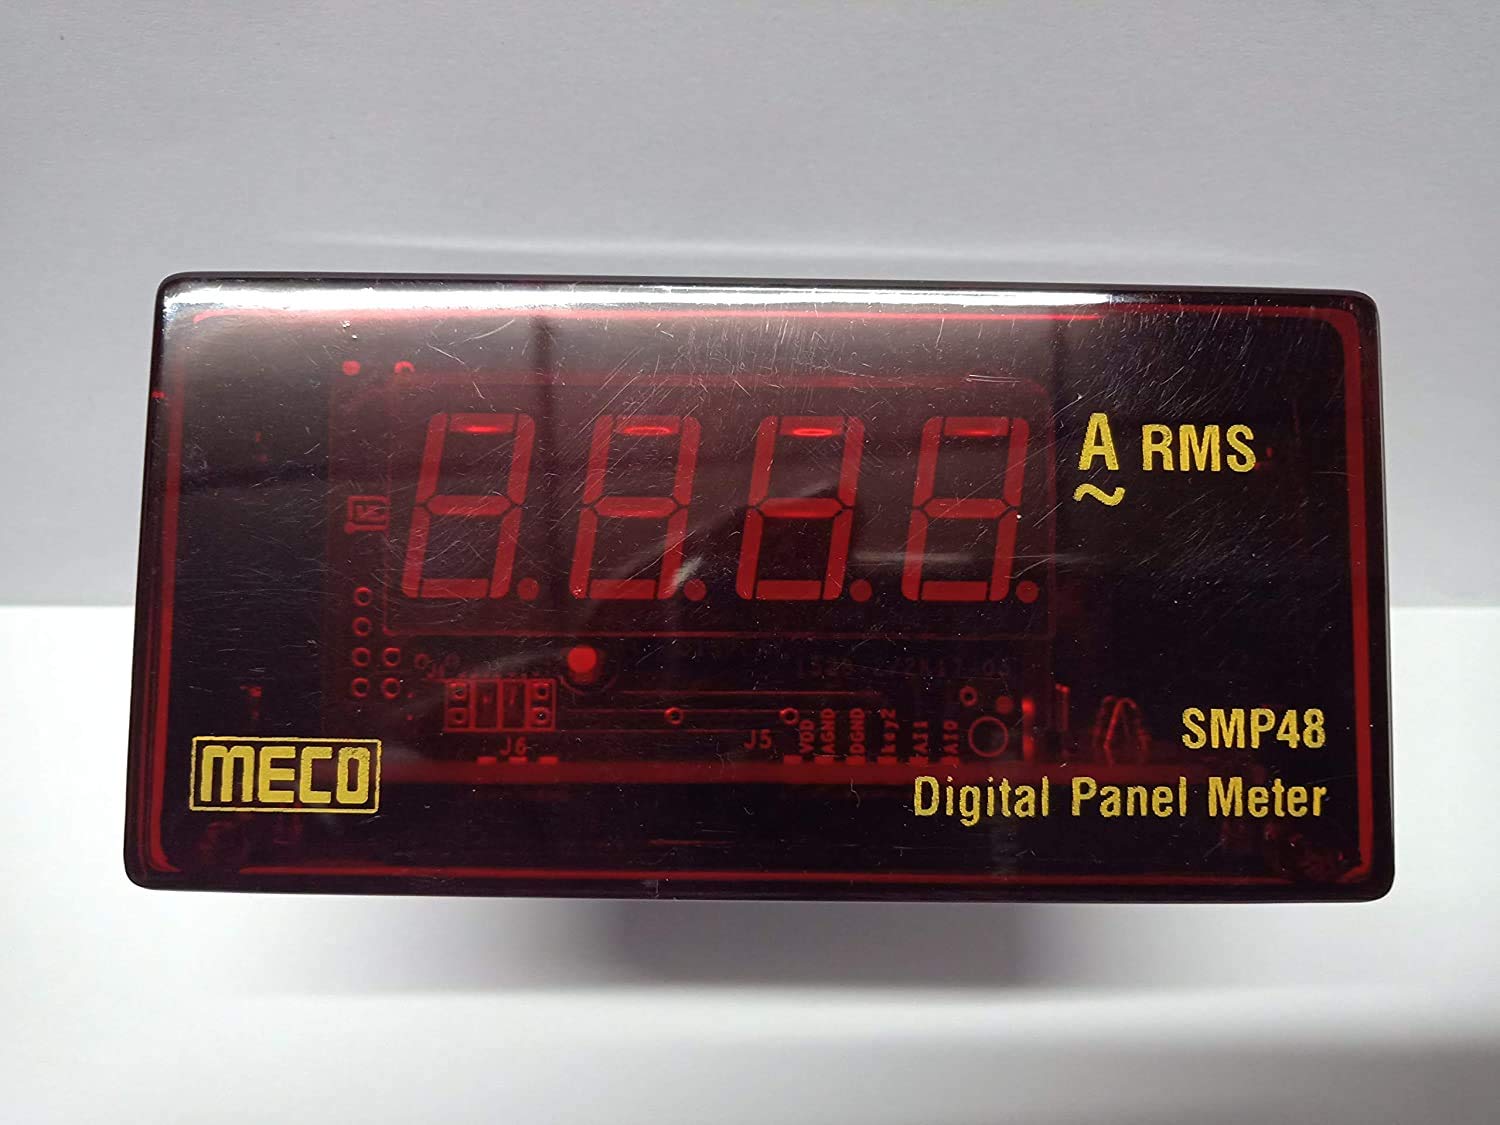 Meco Digital Panel Meter; SMP-48; 0-5 A AC RS - RESCALEABLE AMP METER TO BE WITH EXTERNAL CT RANGE 50/5 to 9000/5